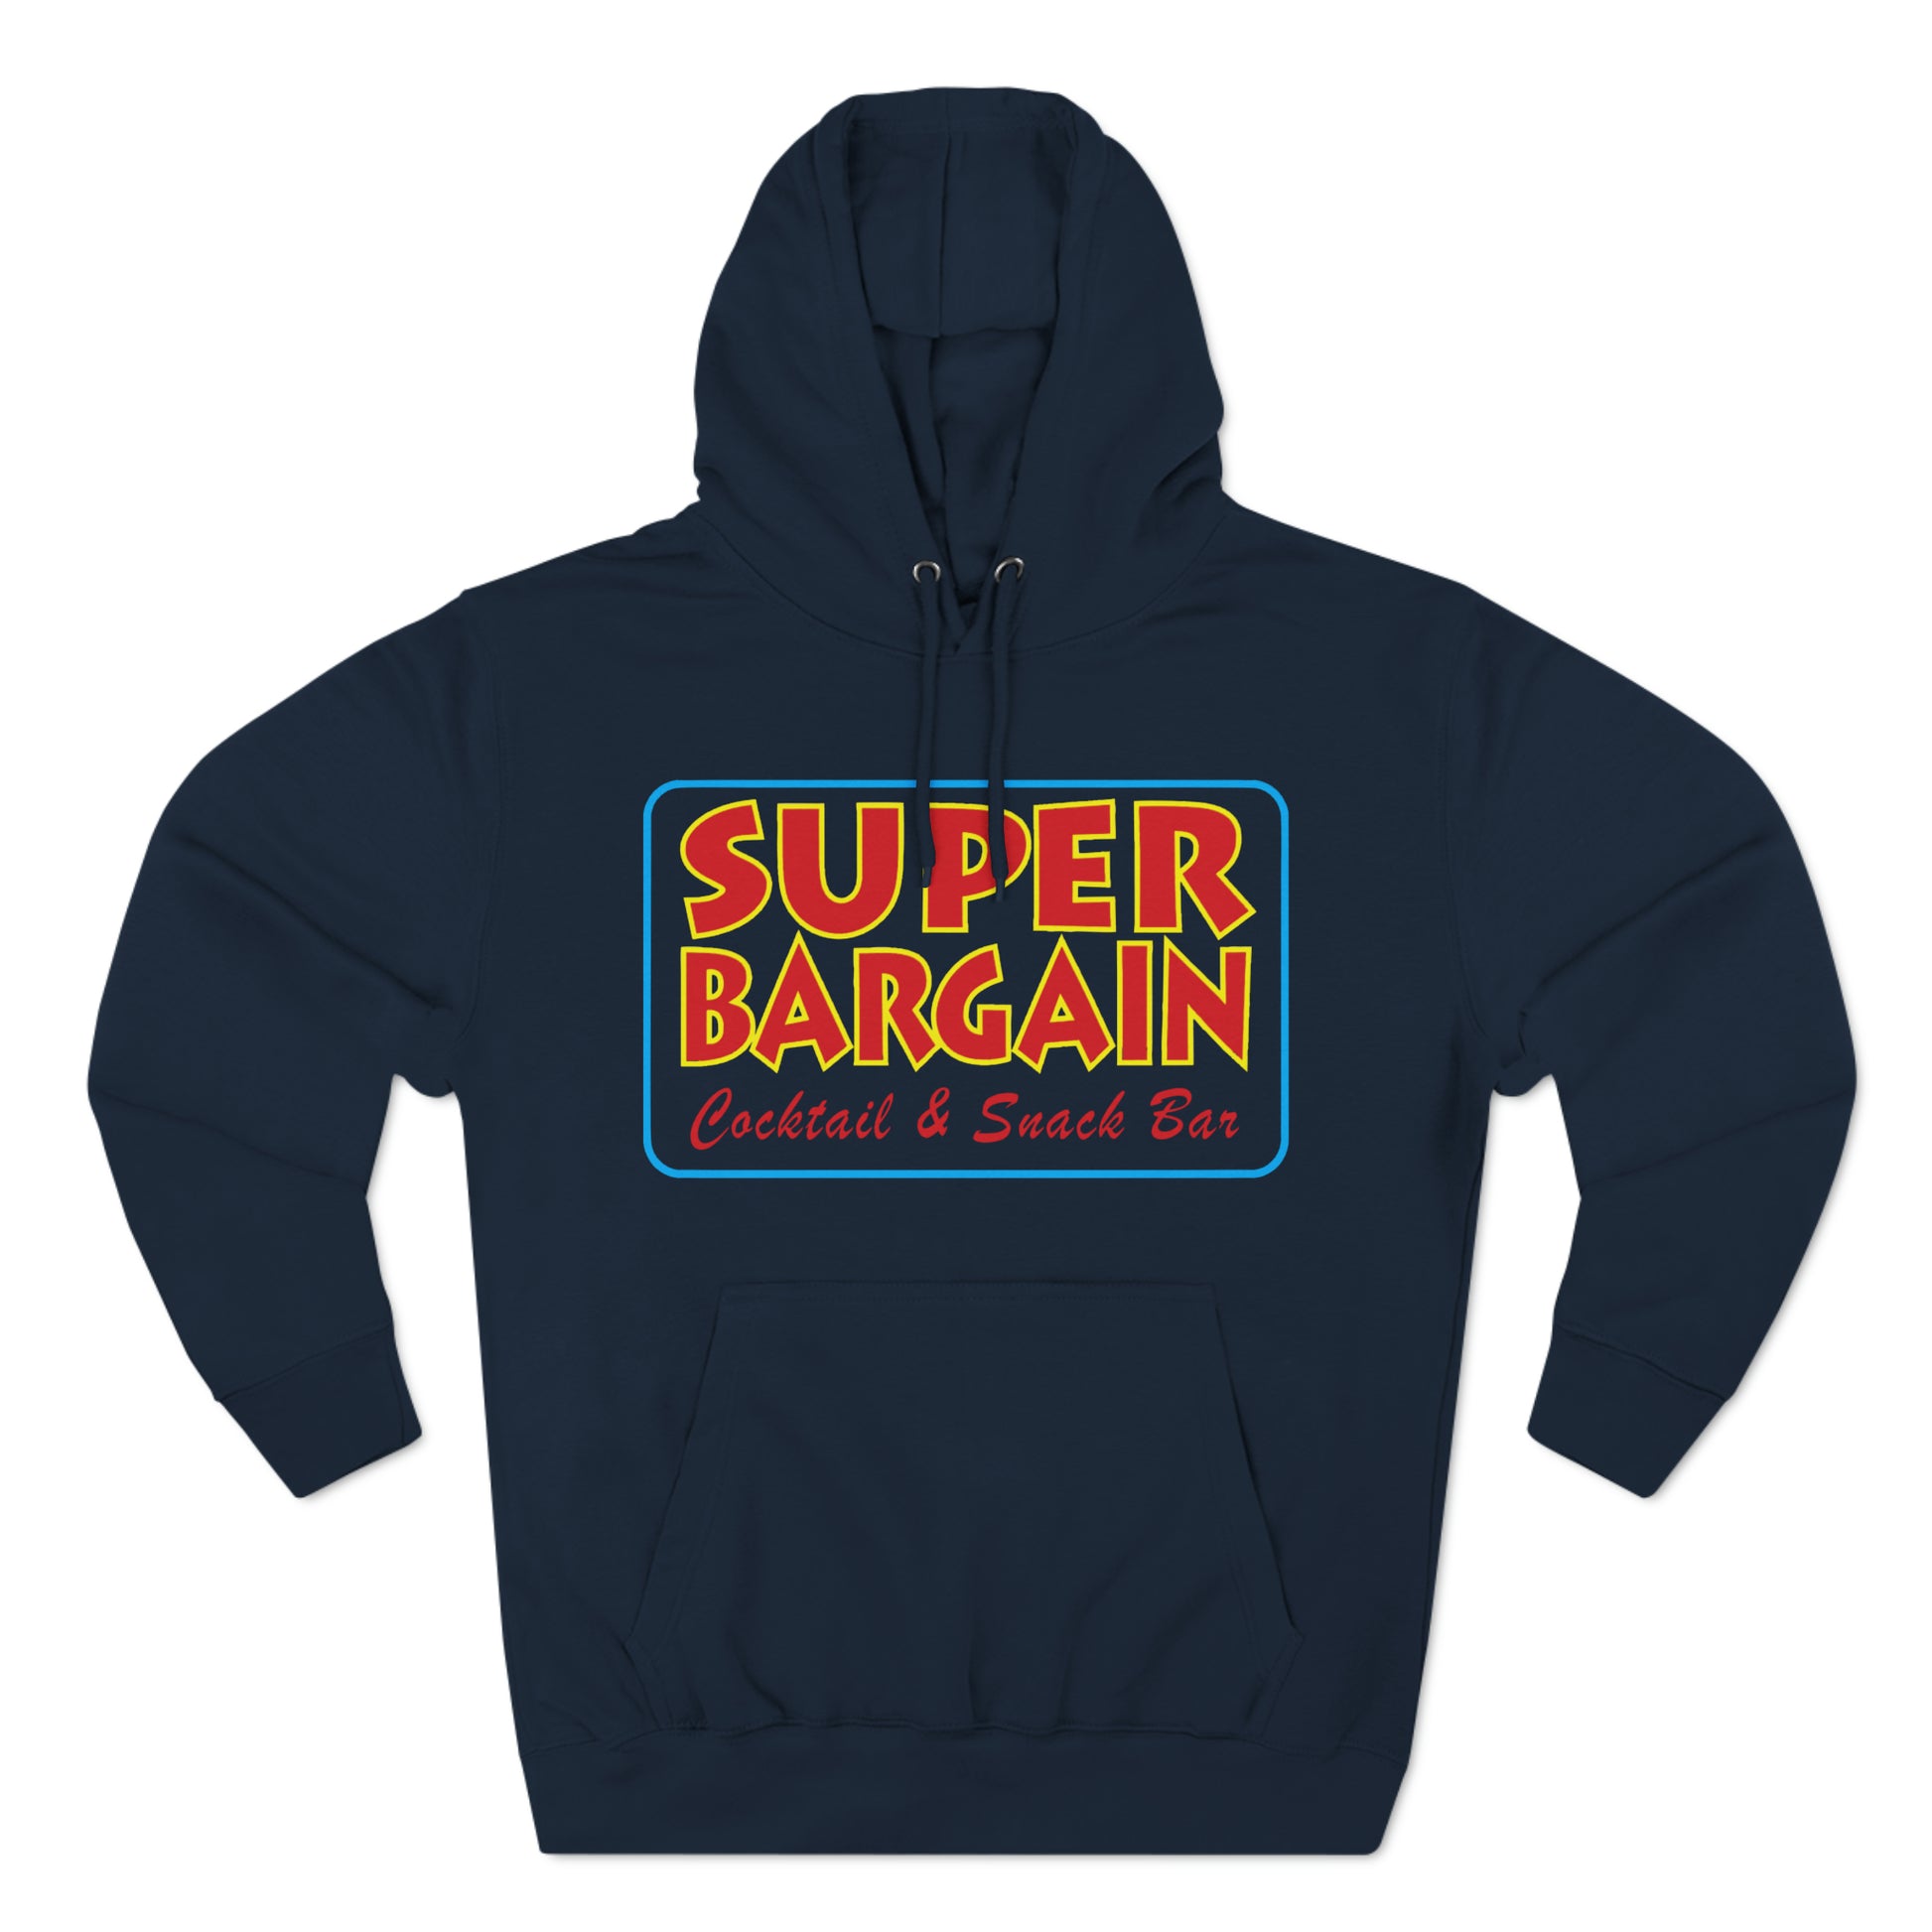 Dark blue Unisex Premium Pullover Hoodie with a colorful graphic on the front featuring the text "SUPER BARGAIN Cocktail & Snack Bar, Cabbagetown" in retro style. The hoodie has long sleeves and a front pouch by Printify.